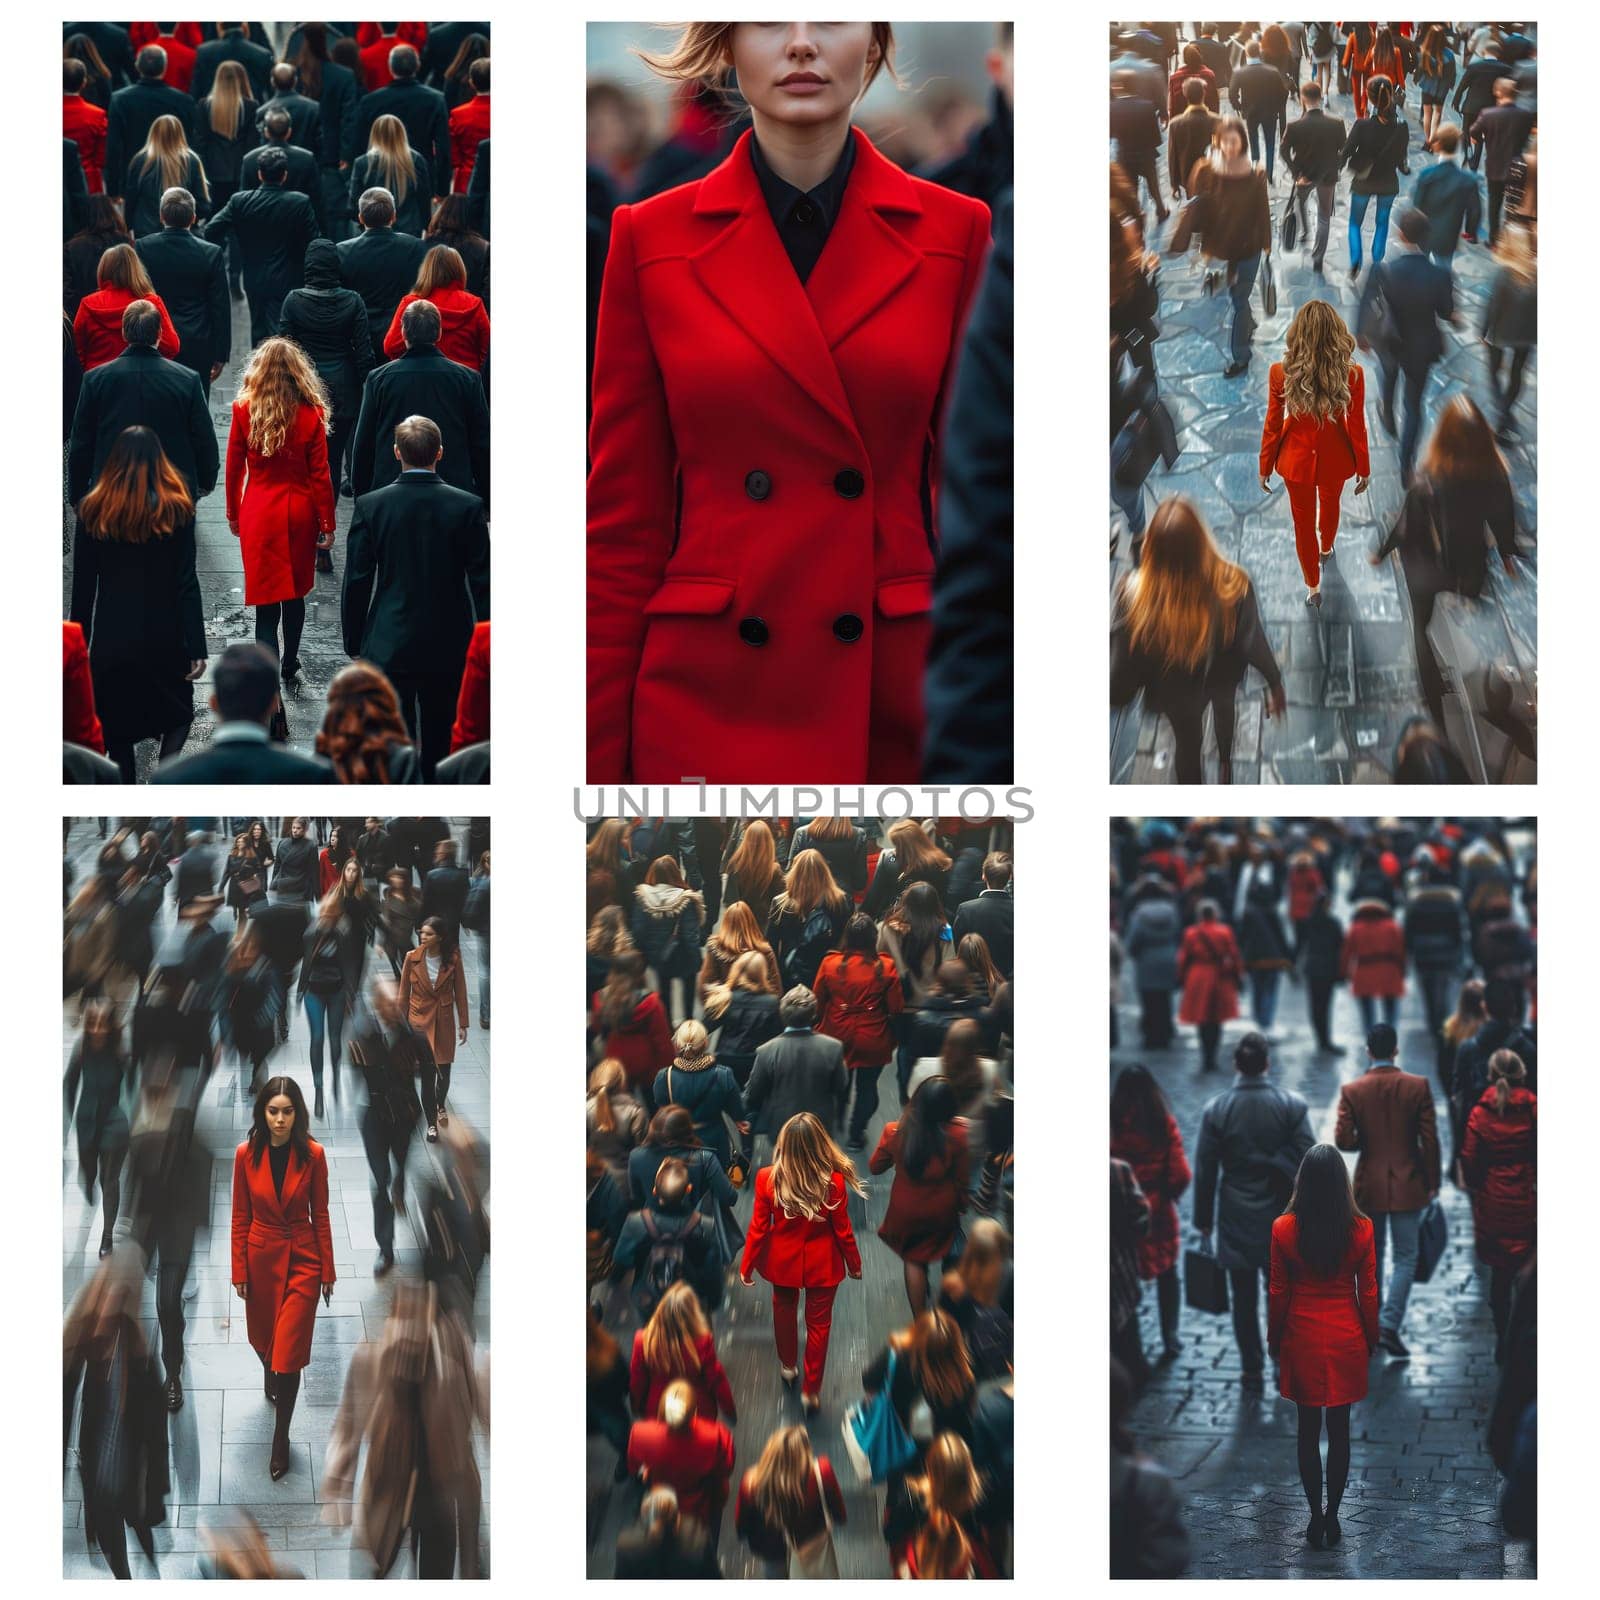 A woman in a red dress walks down a crowded street. The image is a collage of different shots of the woman in various poses and settings. Scene is one of elegance and sophistication